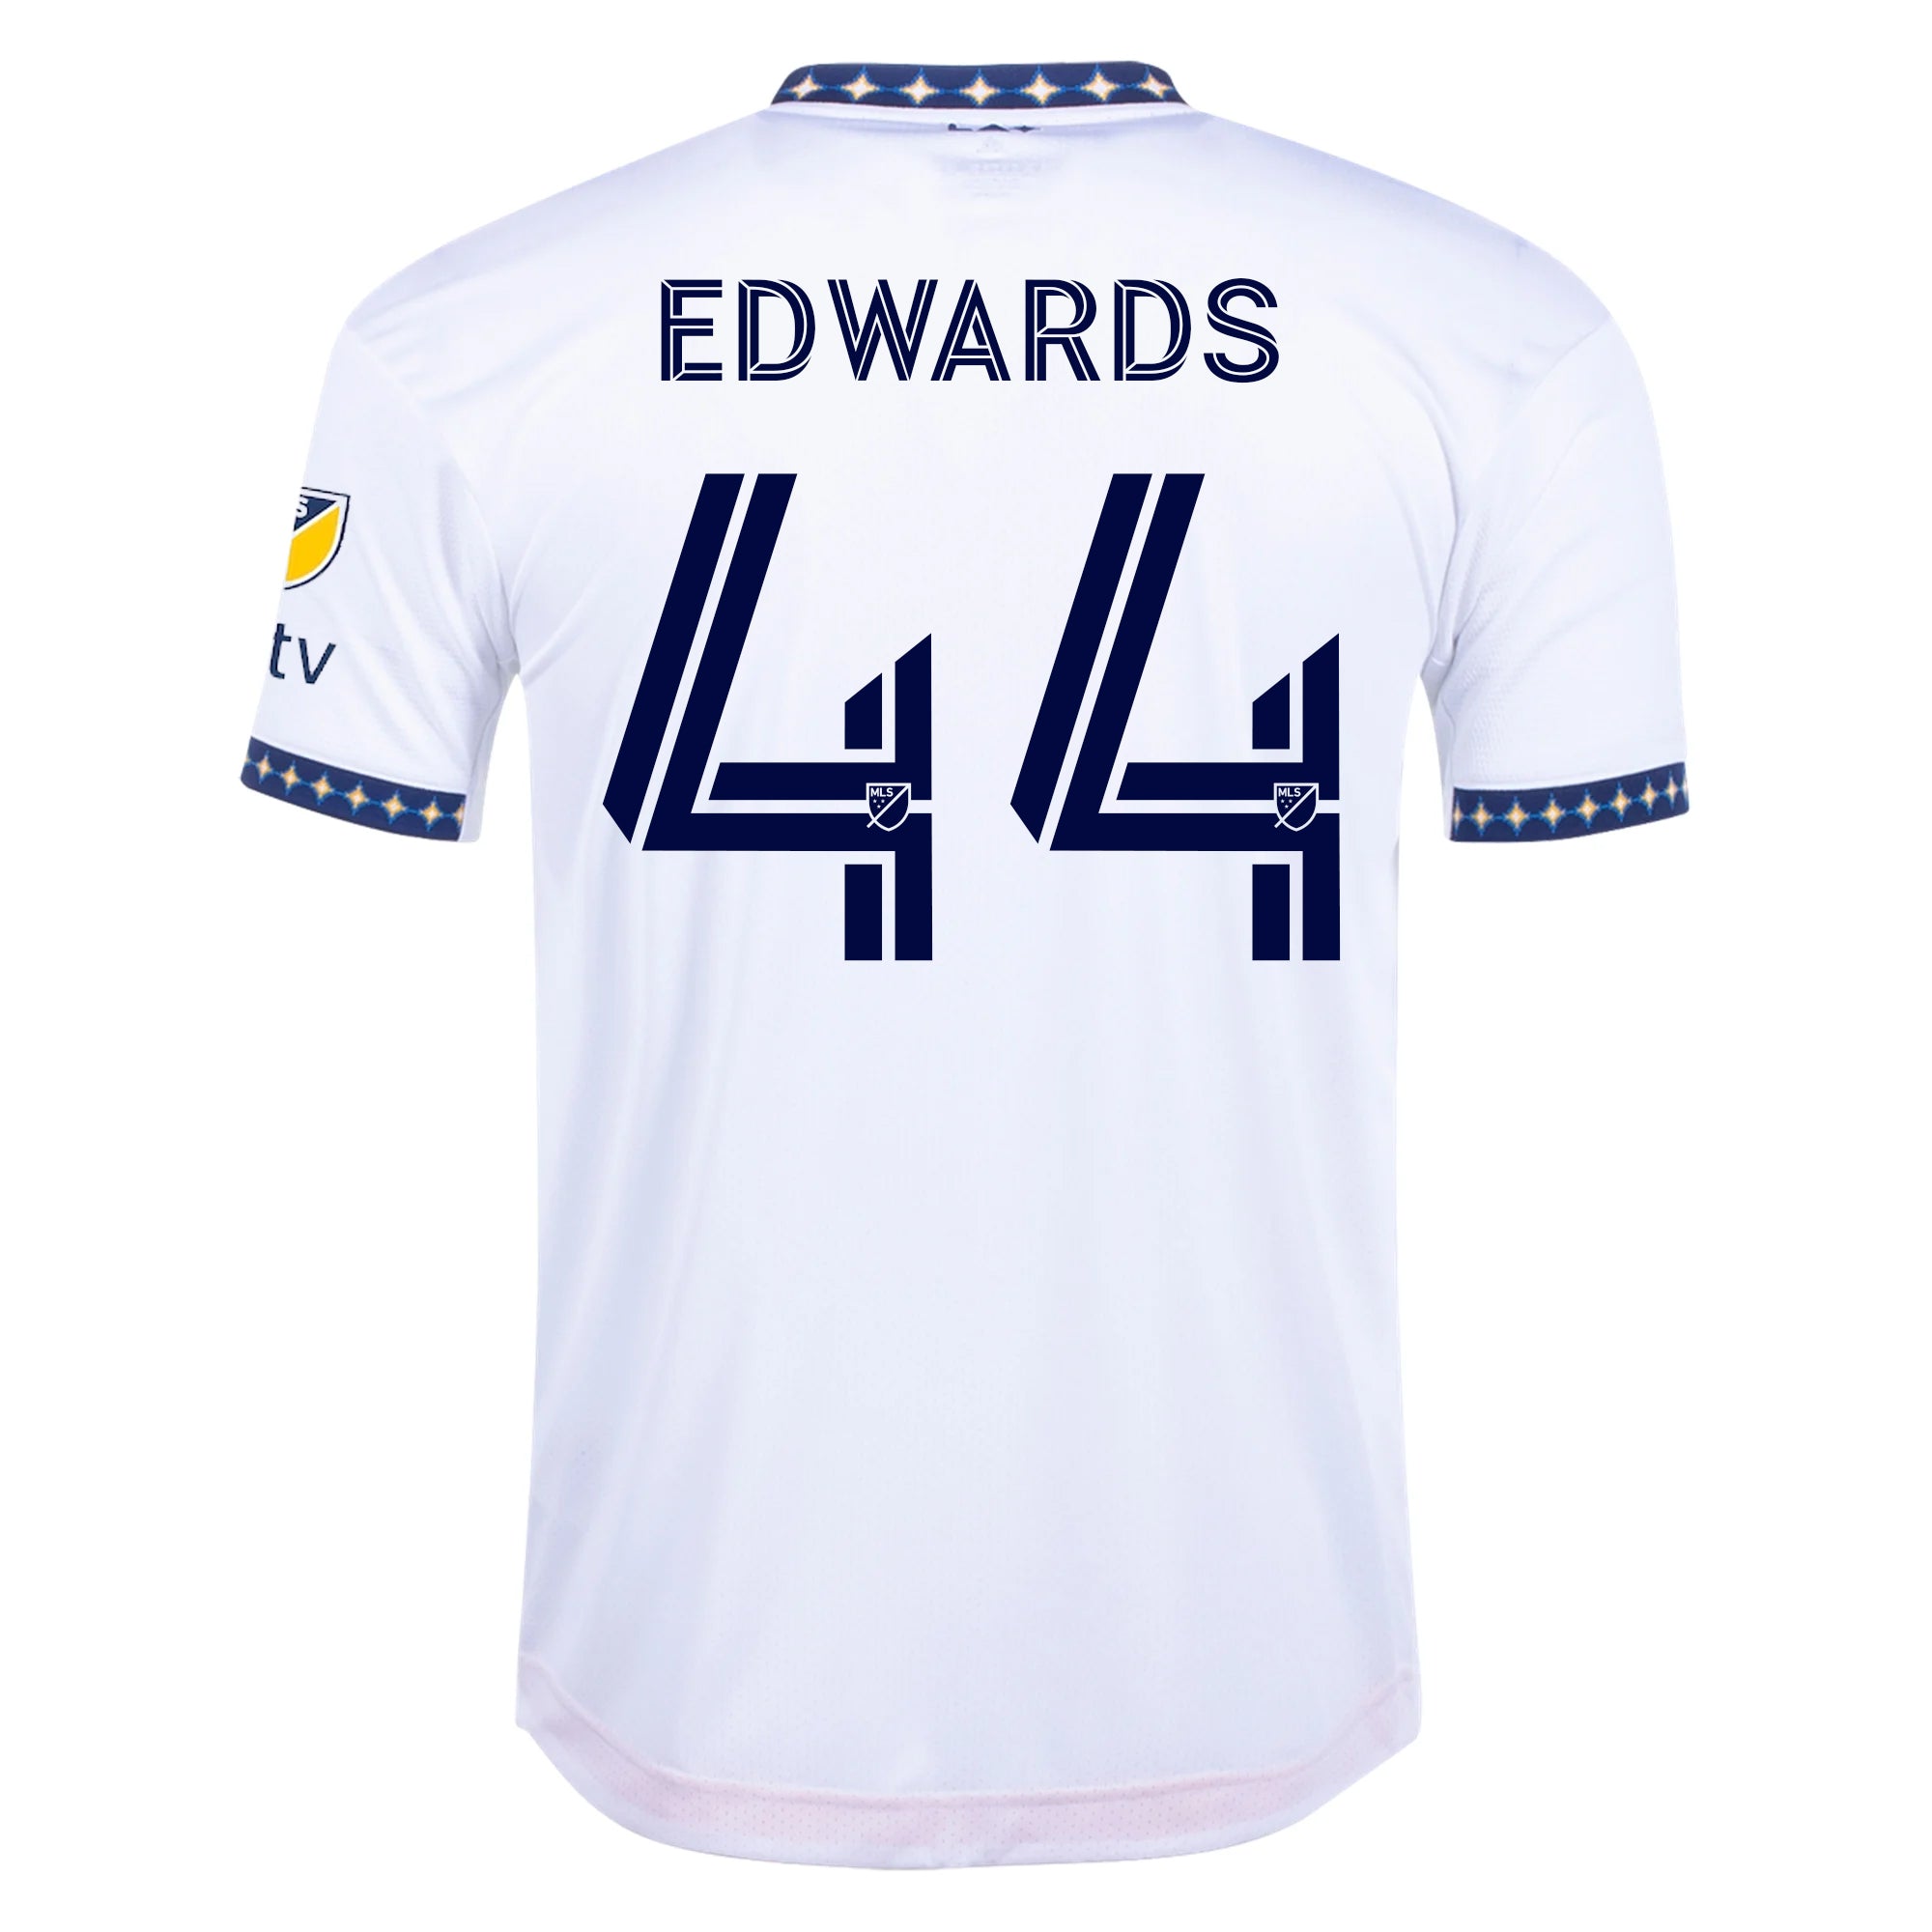 Adidas Edwards La Galaxy Home Authentic Jersey 22/23 w/ MLS Patches (White) Size XL